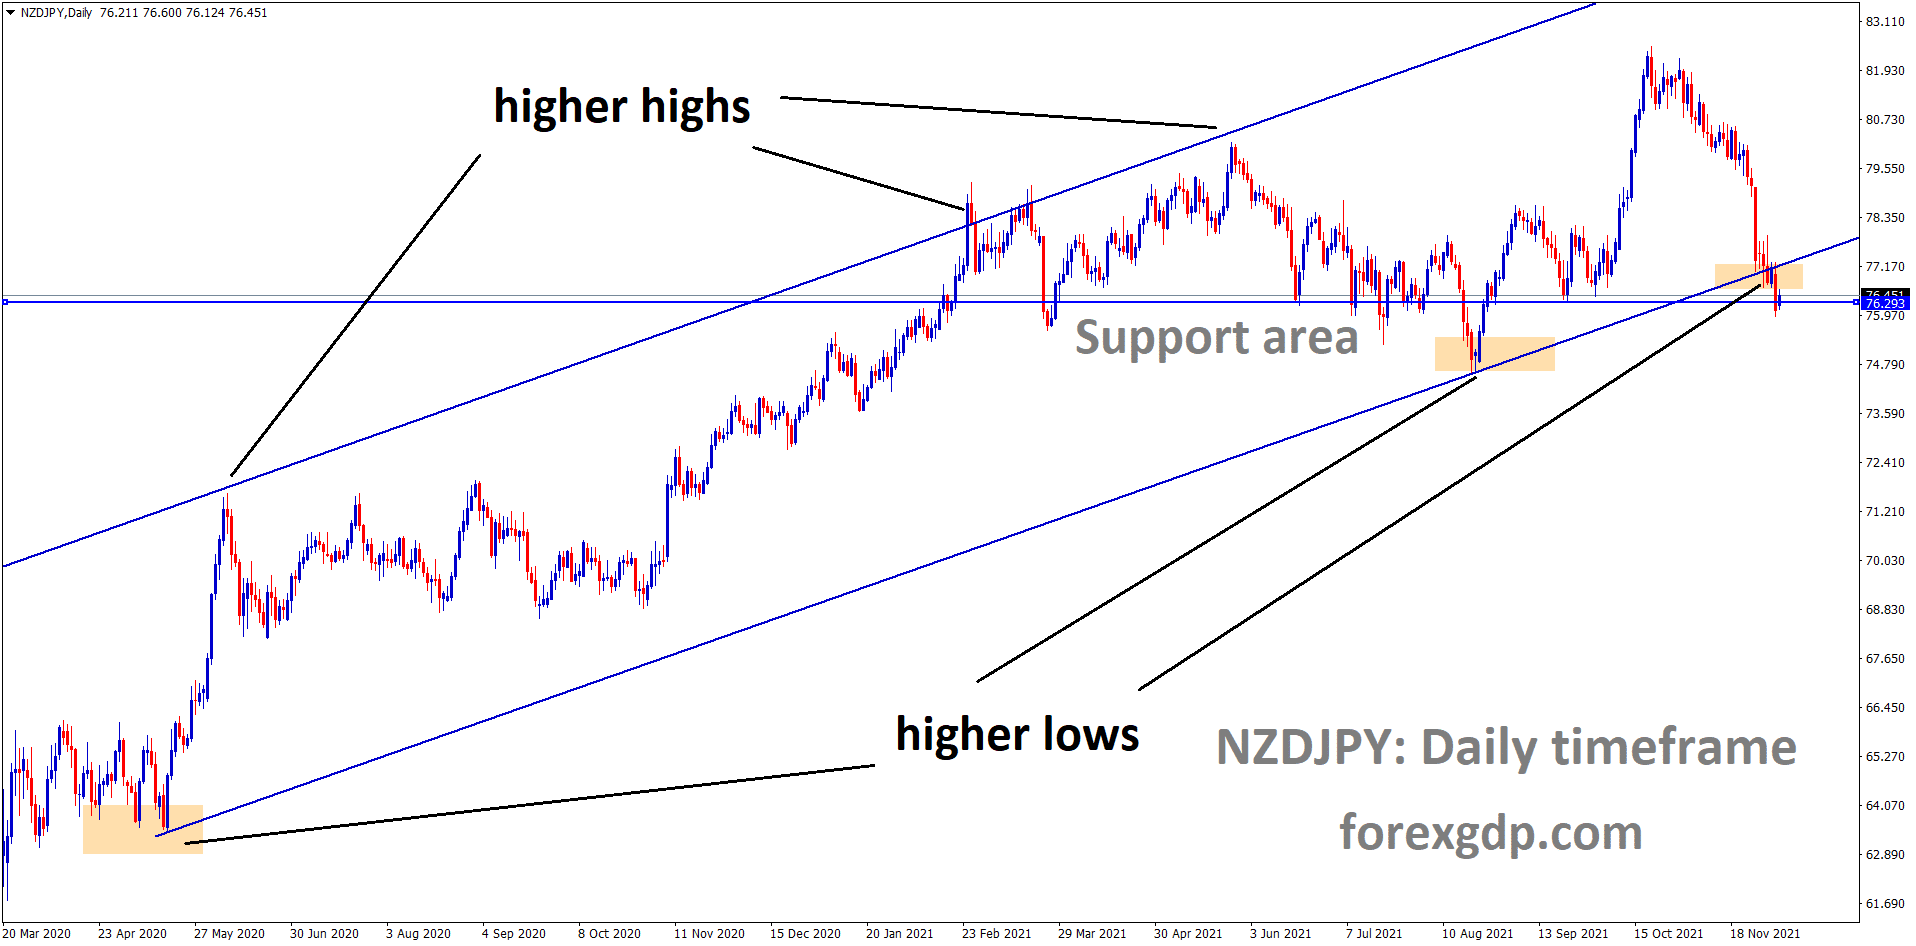 NZDJPY is moving in an Ascending channel and the market has reached the higher low area and horizontal support area of the channel